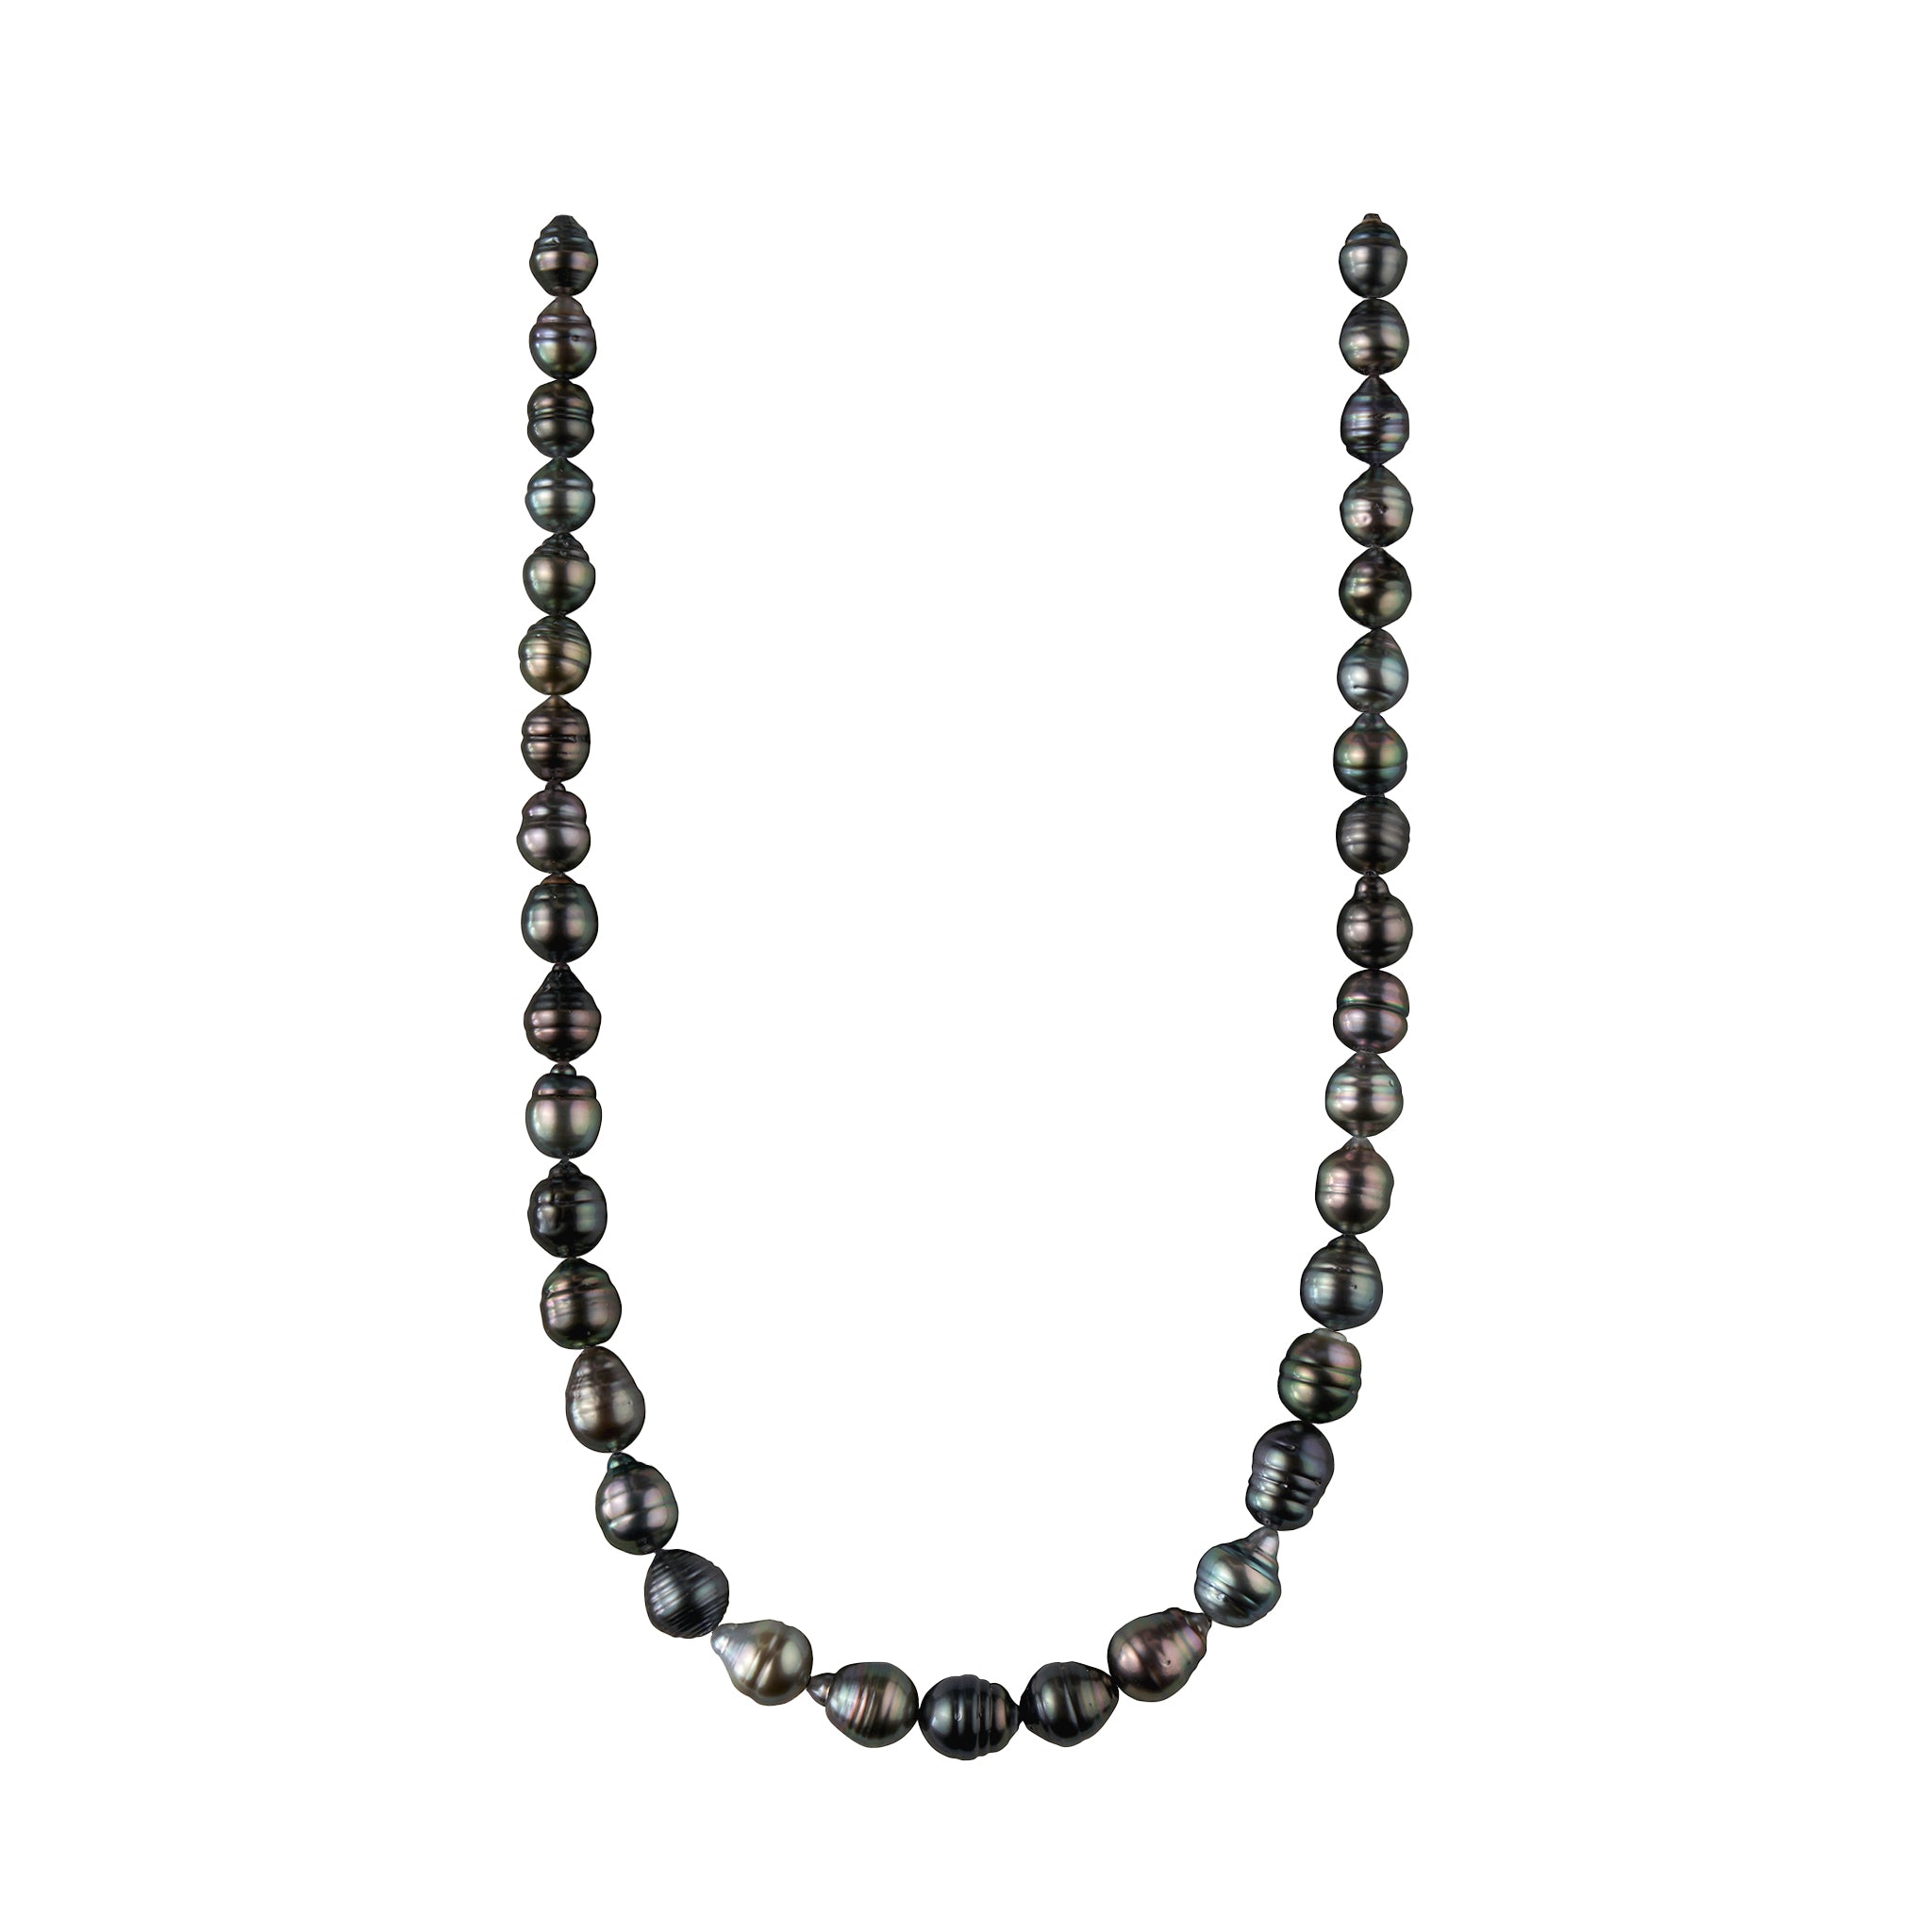 Tahitian Pearl Necklaces - Black Pearl Necklaces